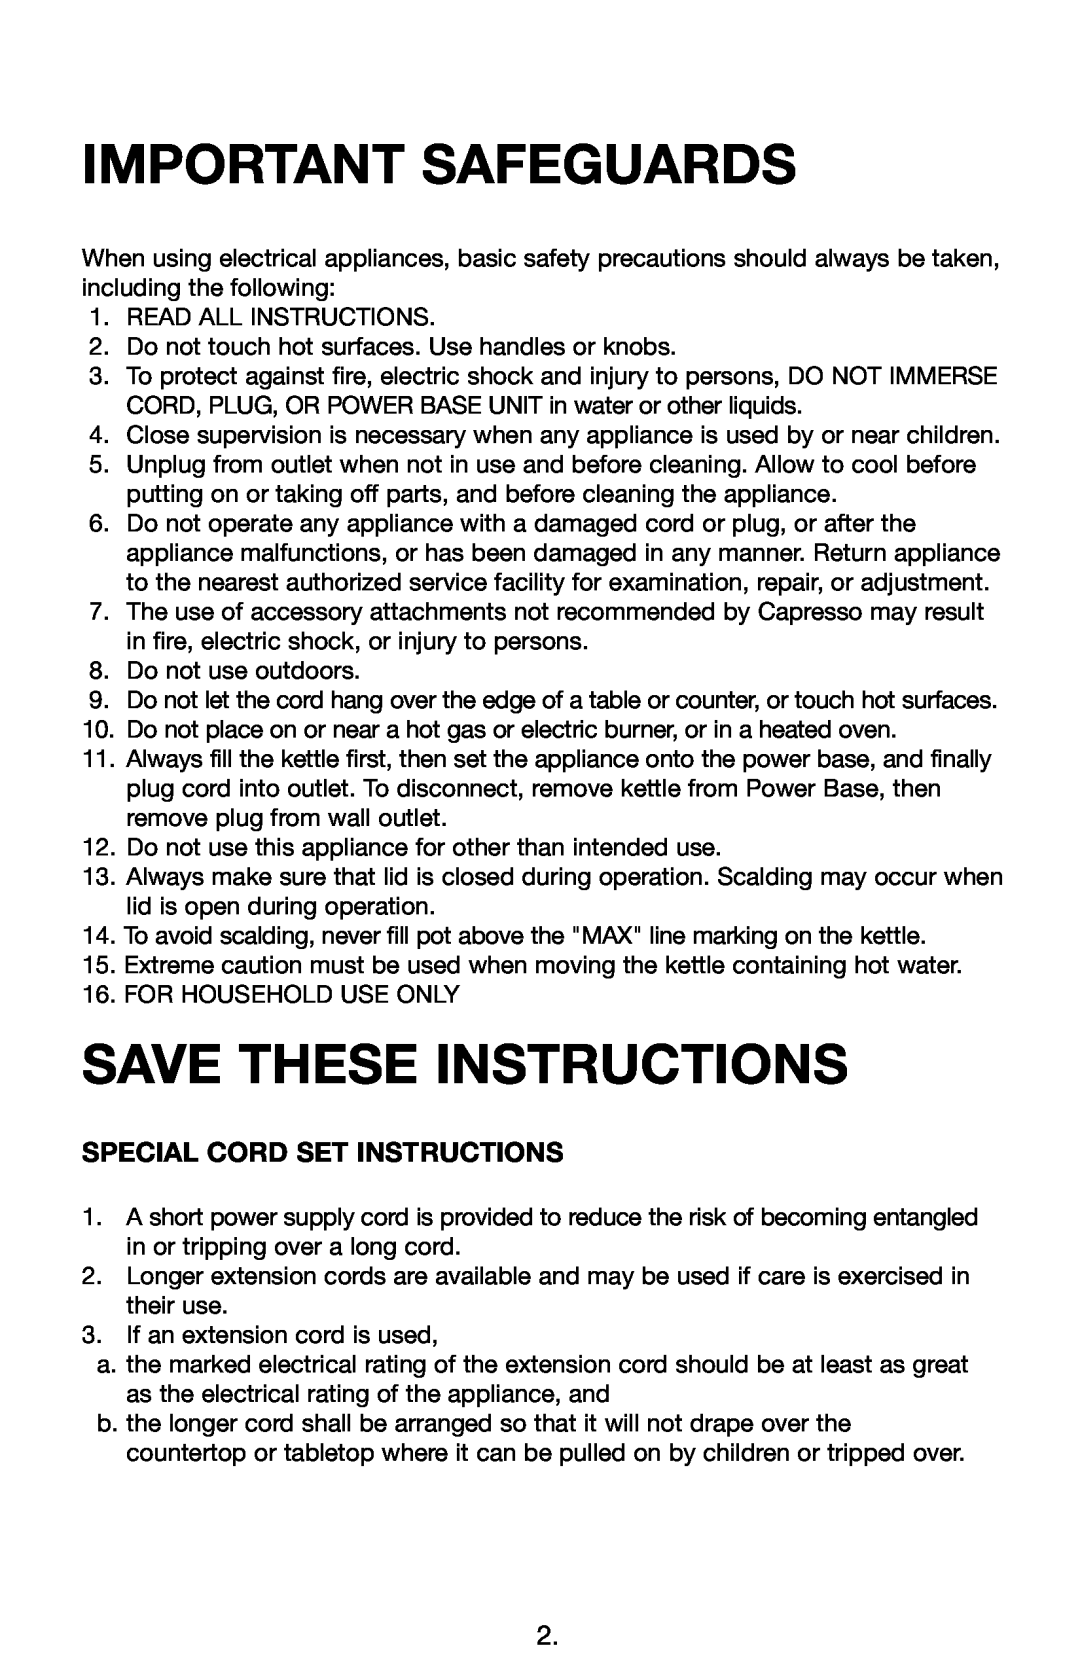 Capresso 259 warranty Special Cord Set Instructions, Important Safeguards, Save These Instructions 